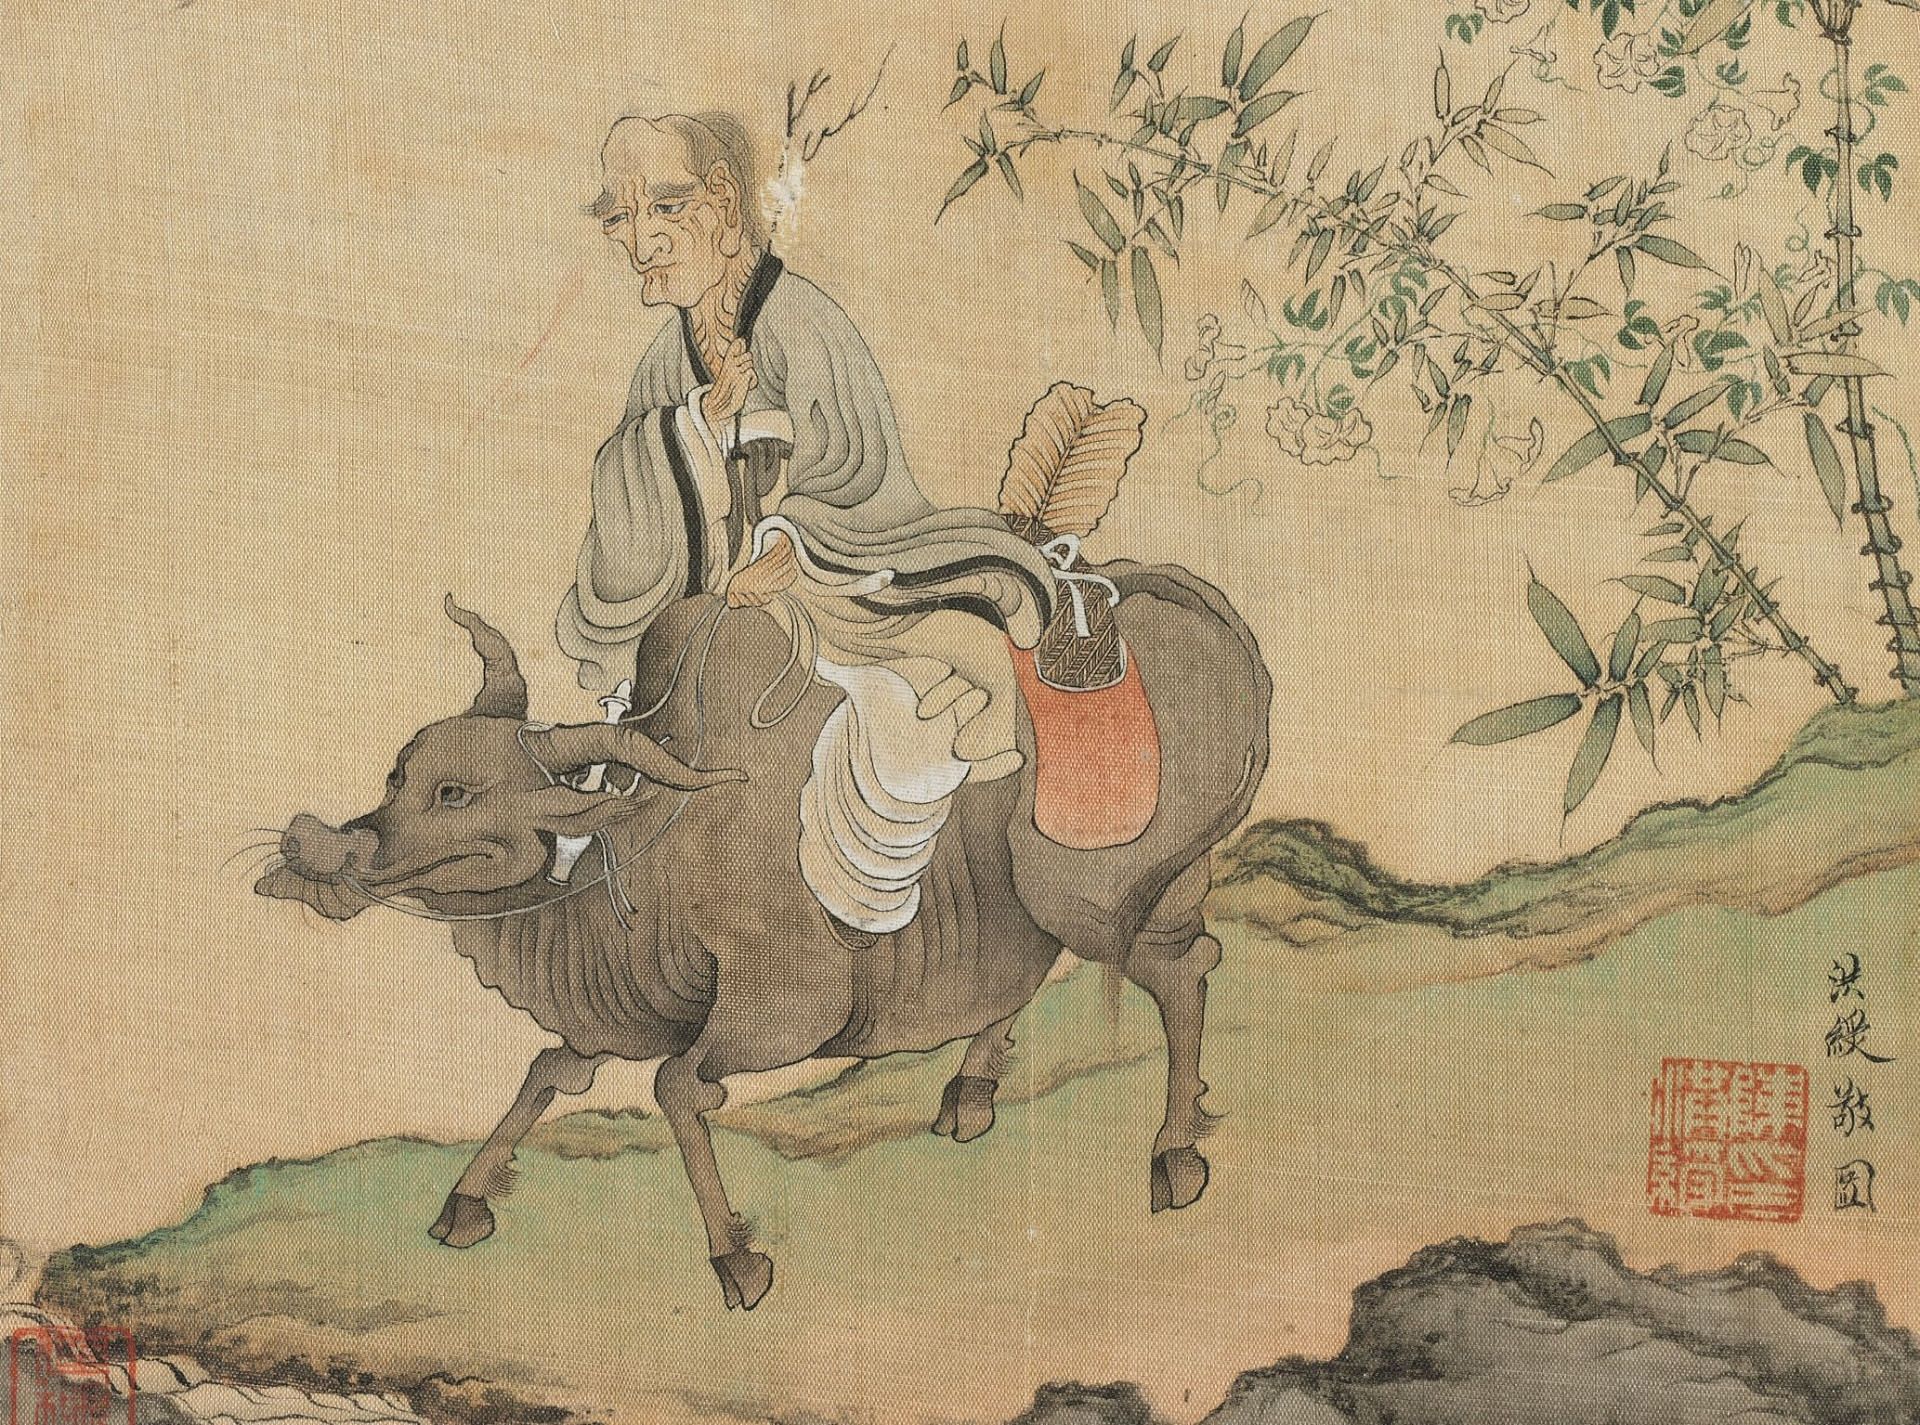 The Founder of Taoism, Laozi riding an ox (Painted by Chen Hongshou)